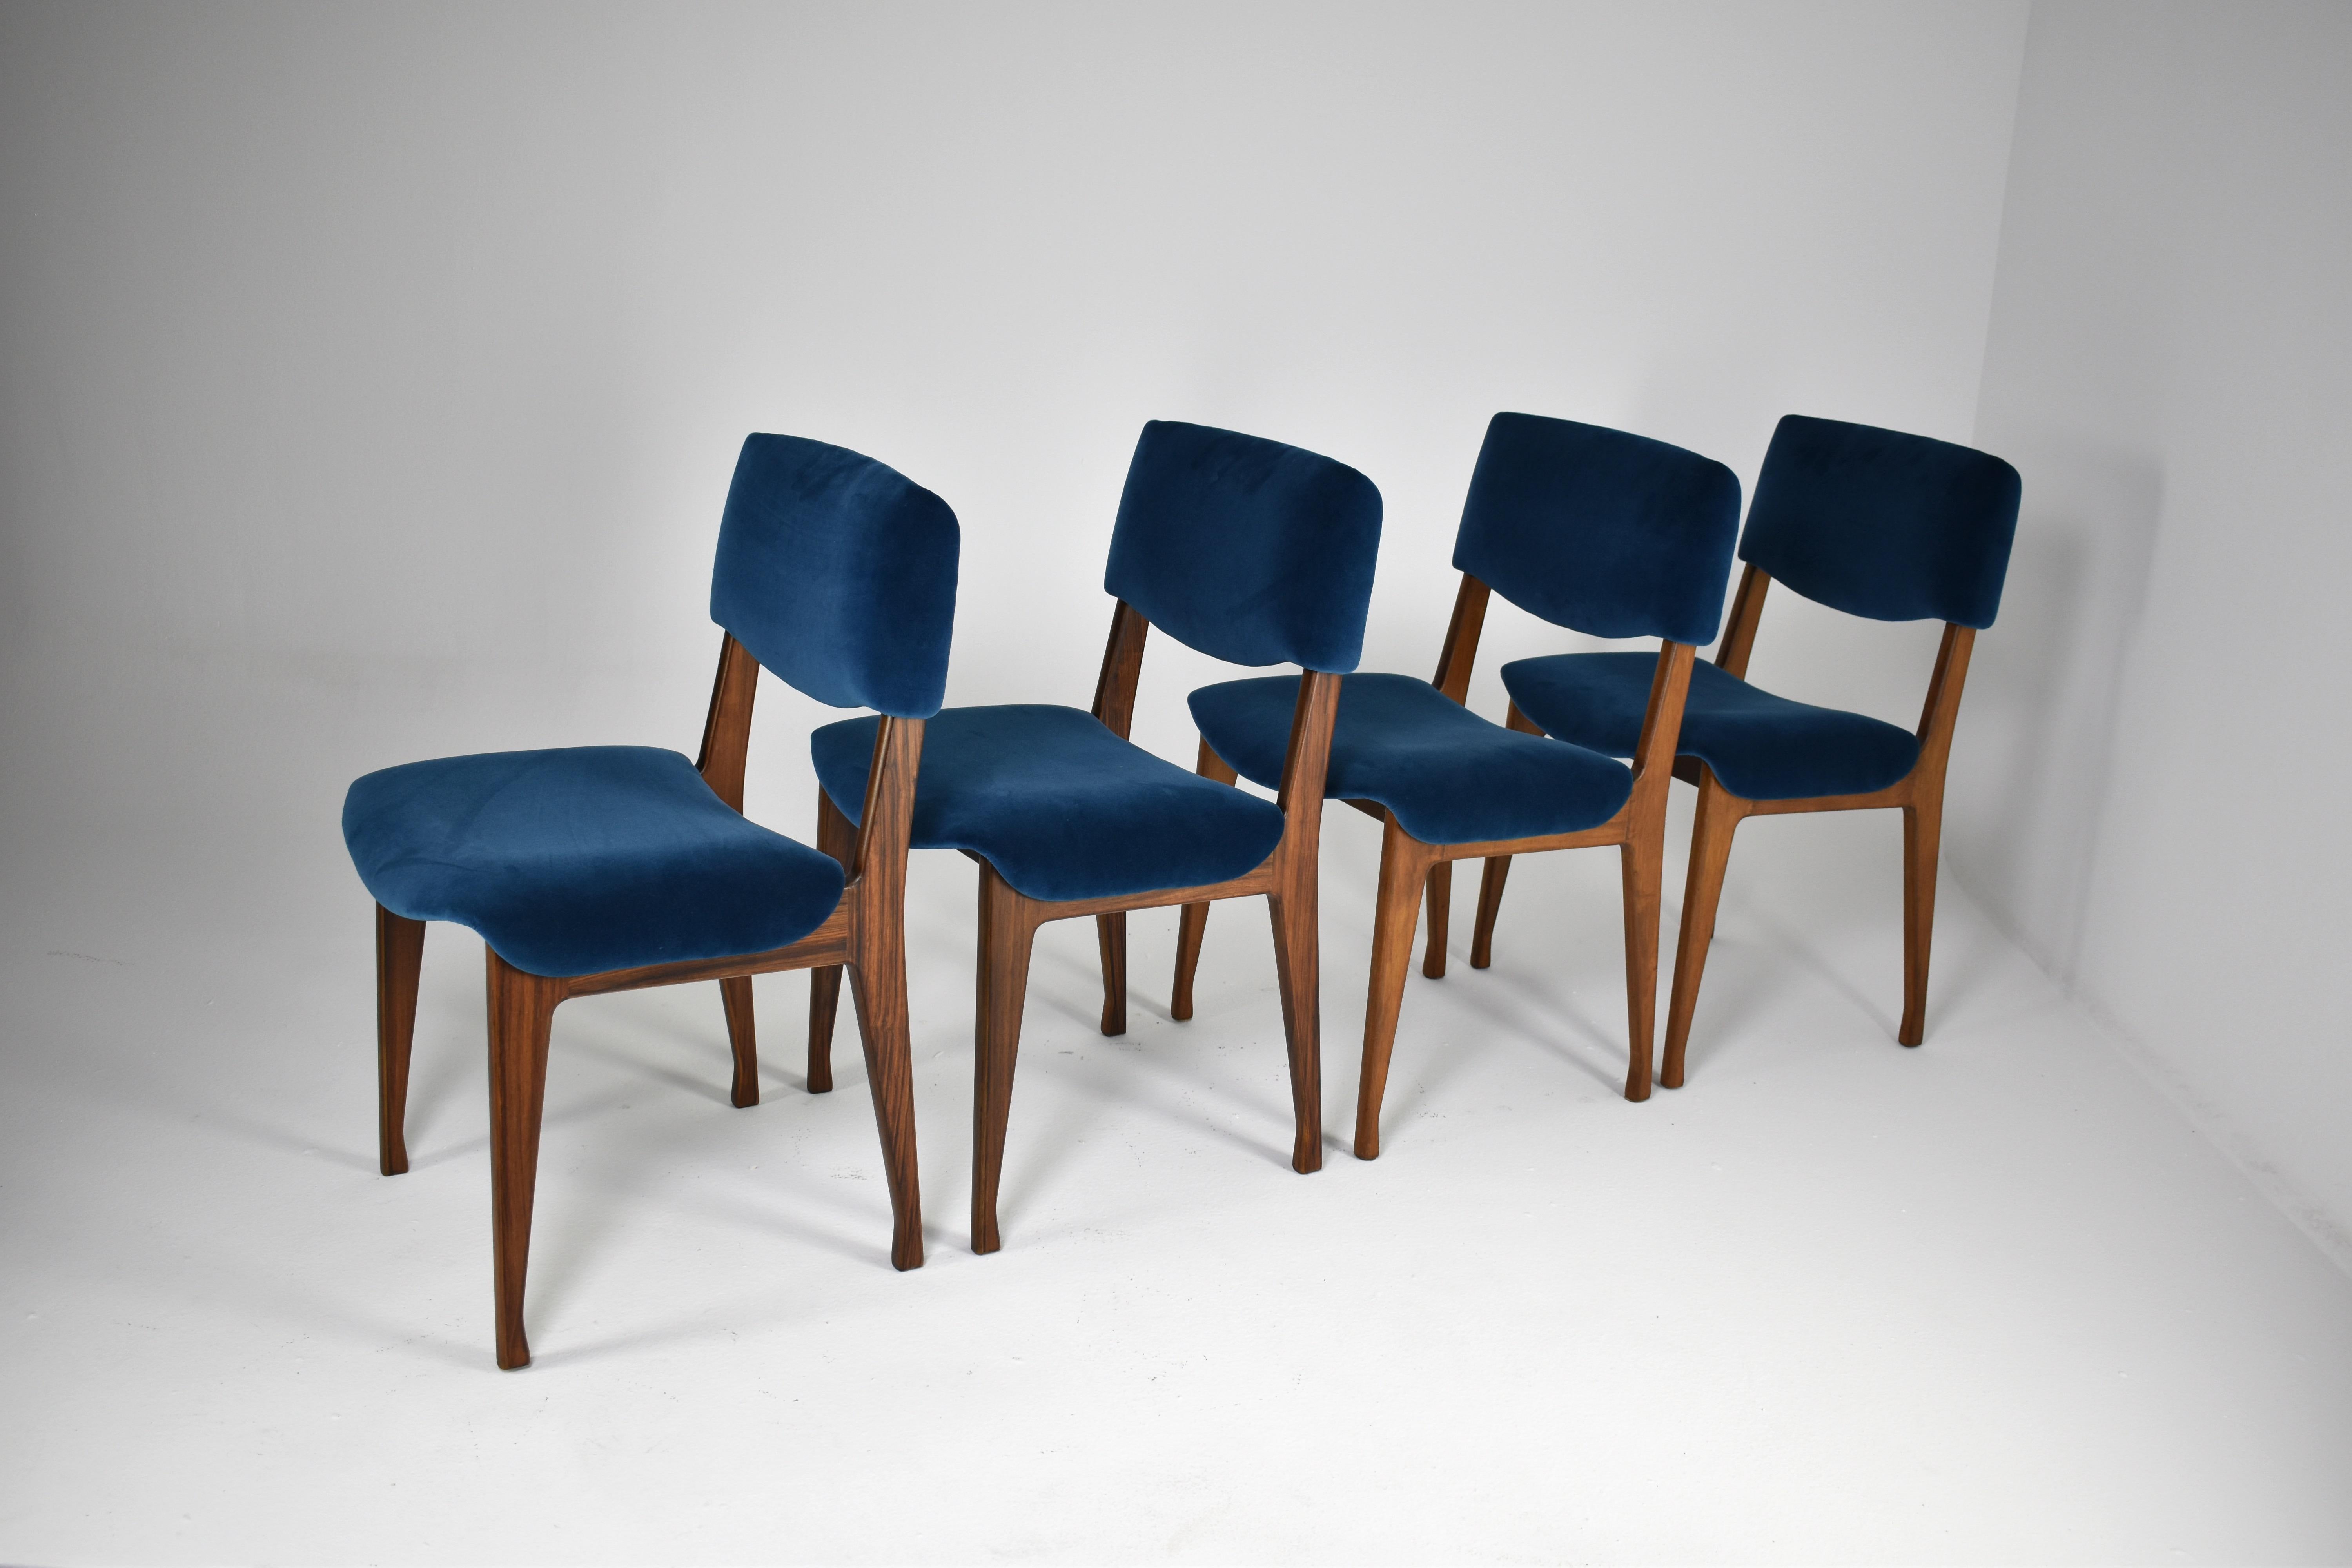 Italian Ico Parisi Wooden Dining Chairs, Set of Four, 1950s-60s For Sale 6